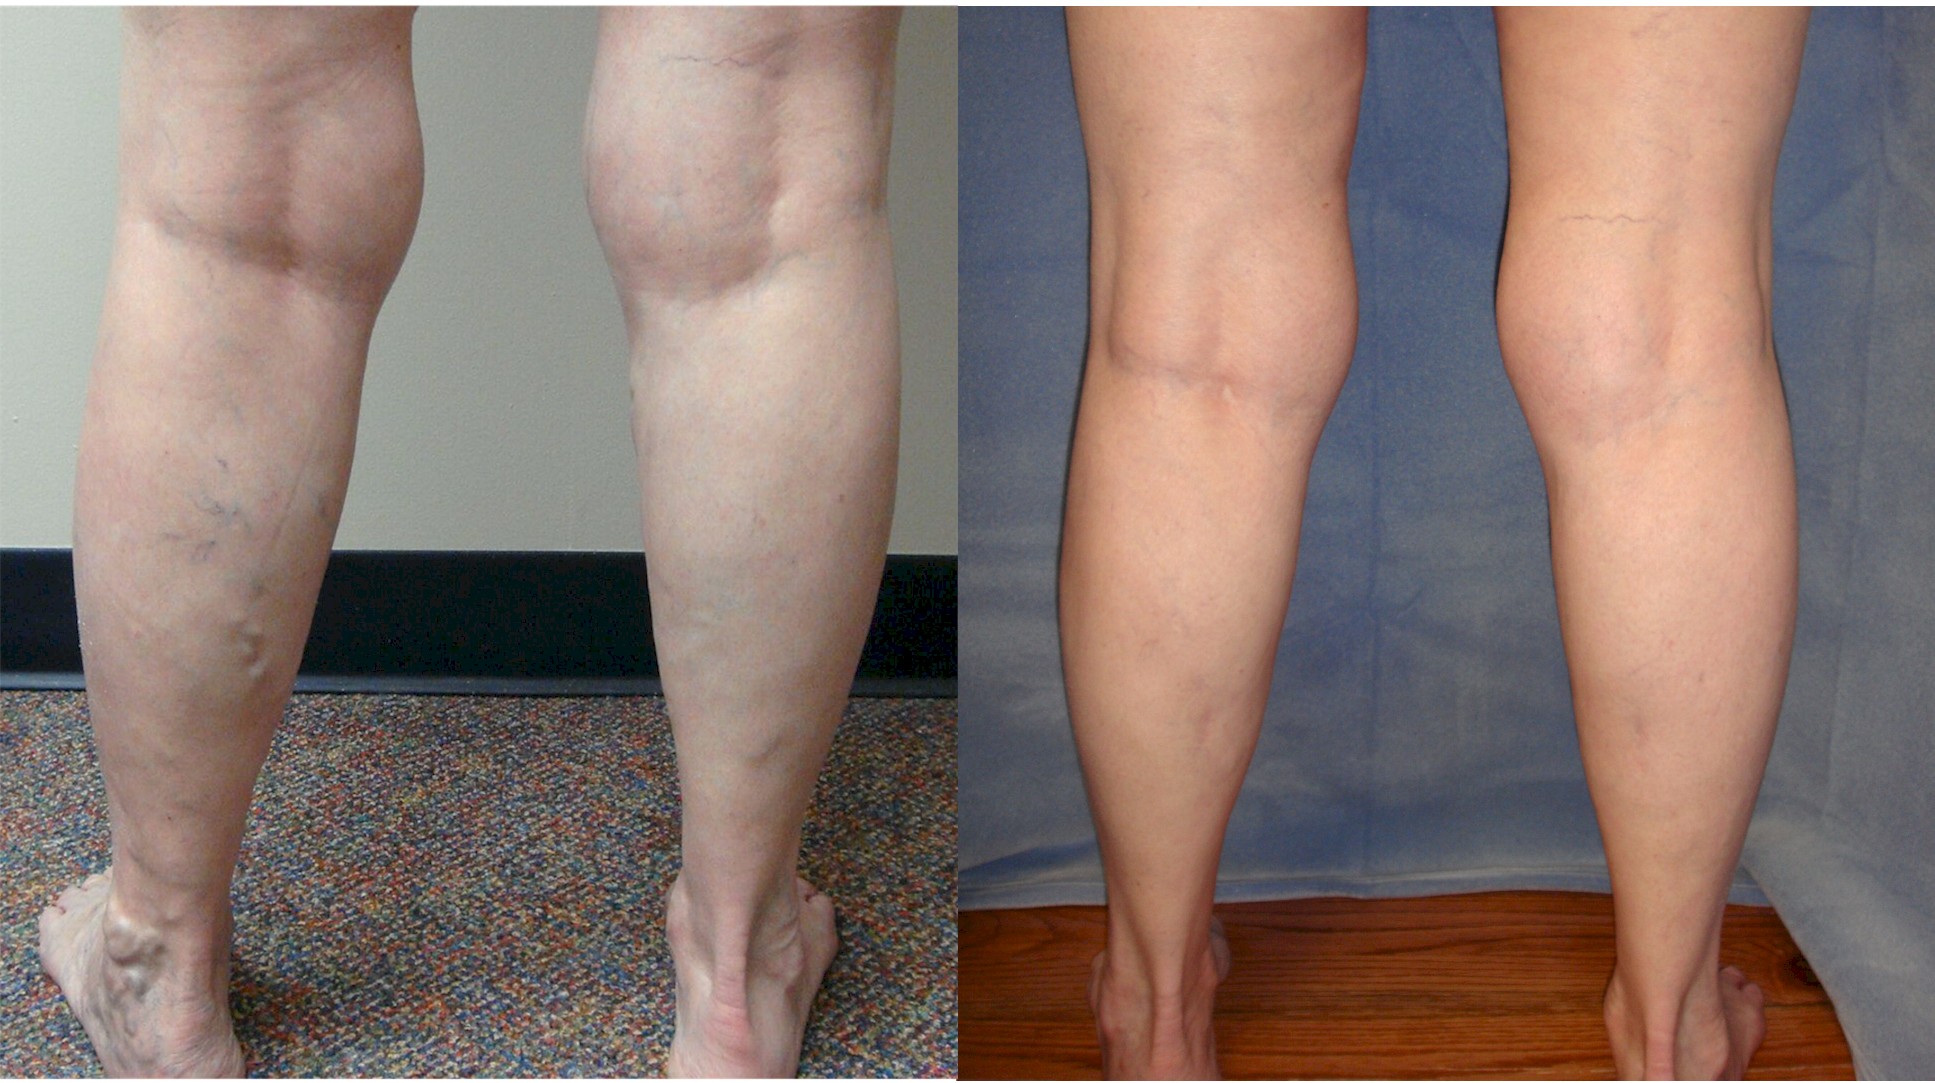 Before and After Picture of Varicose Vein Procedure - Vein Specialists of the Carolinas